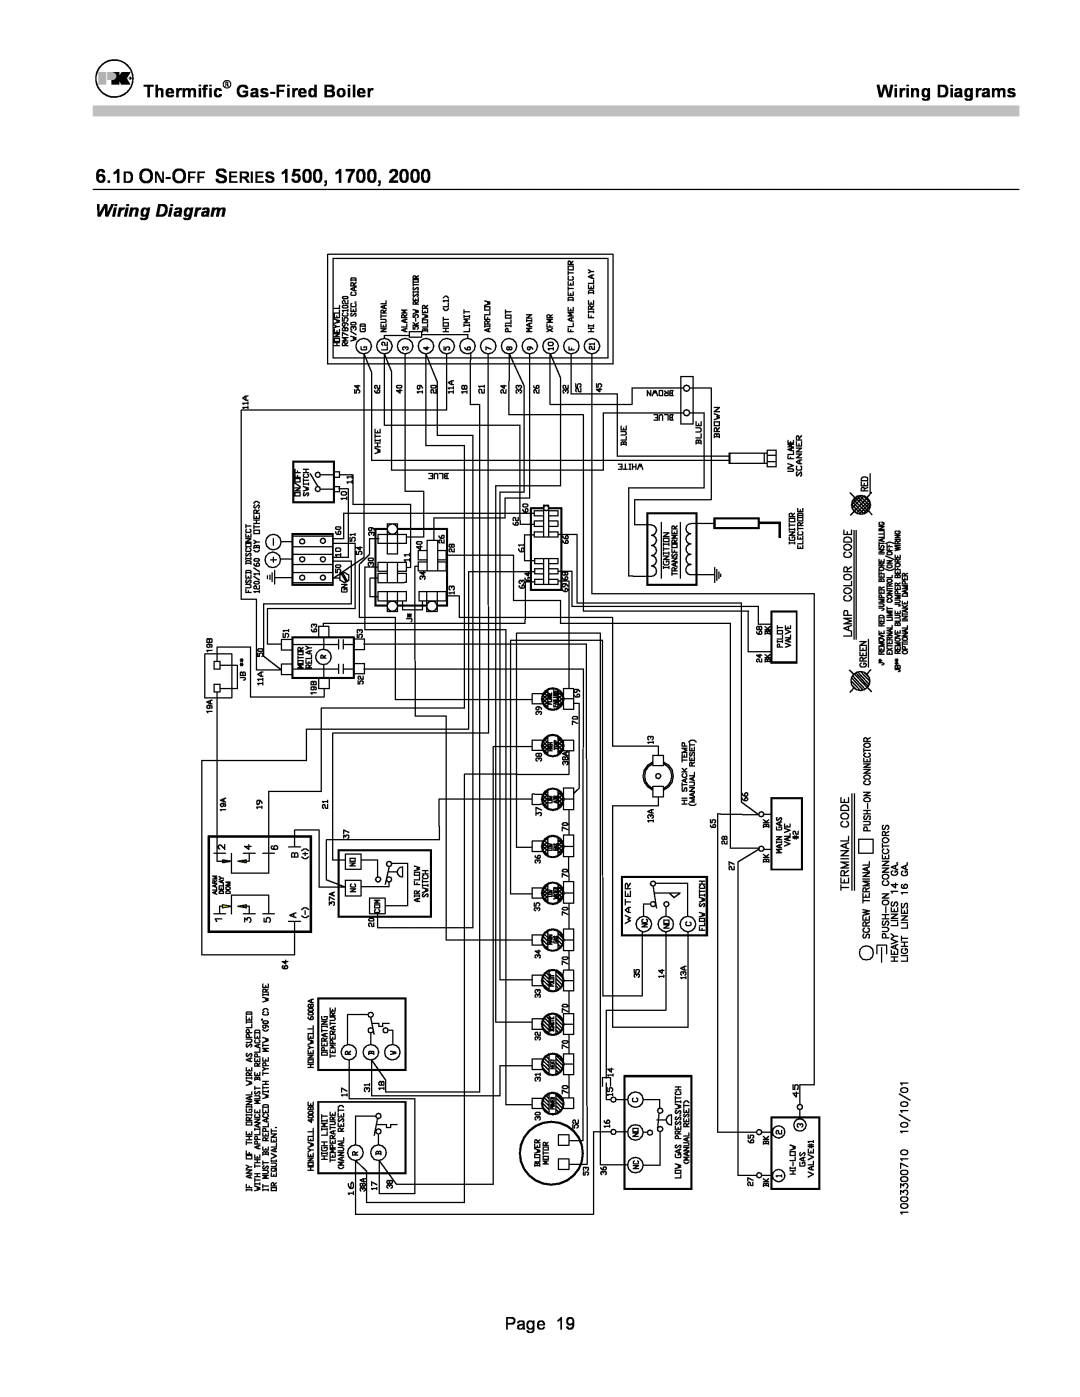 Patterson-Kelley DVSCM-02 owner manual 6.1D ON-OFF SERIES, Thermific Gas-FiredBoiler, Wiring Diagrams 